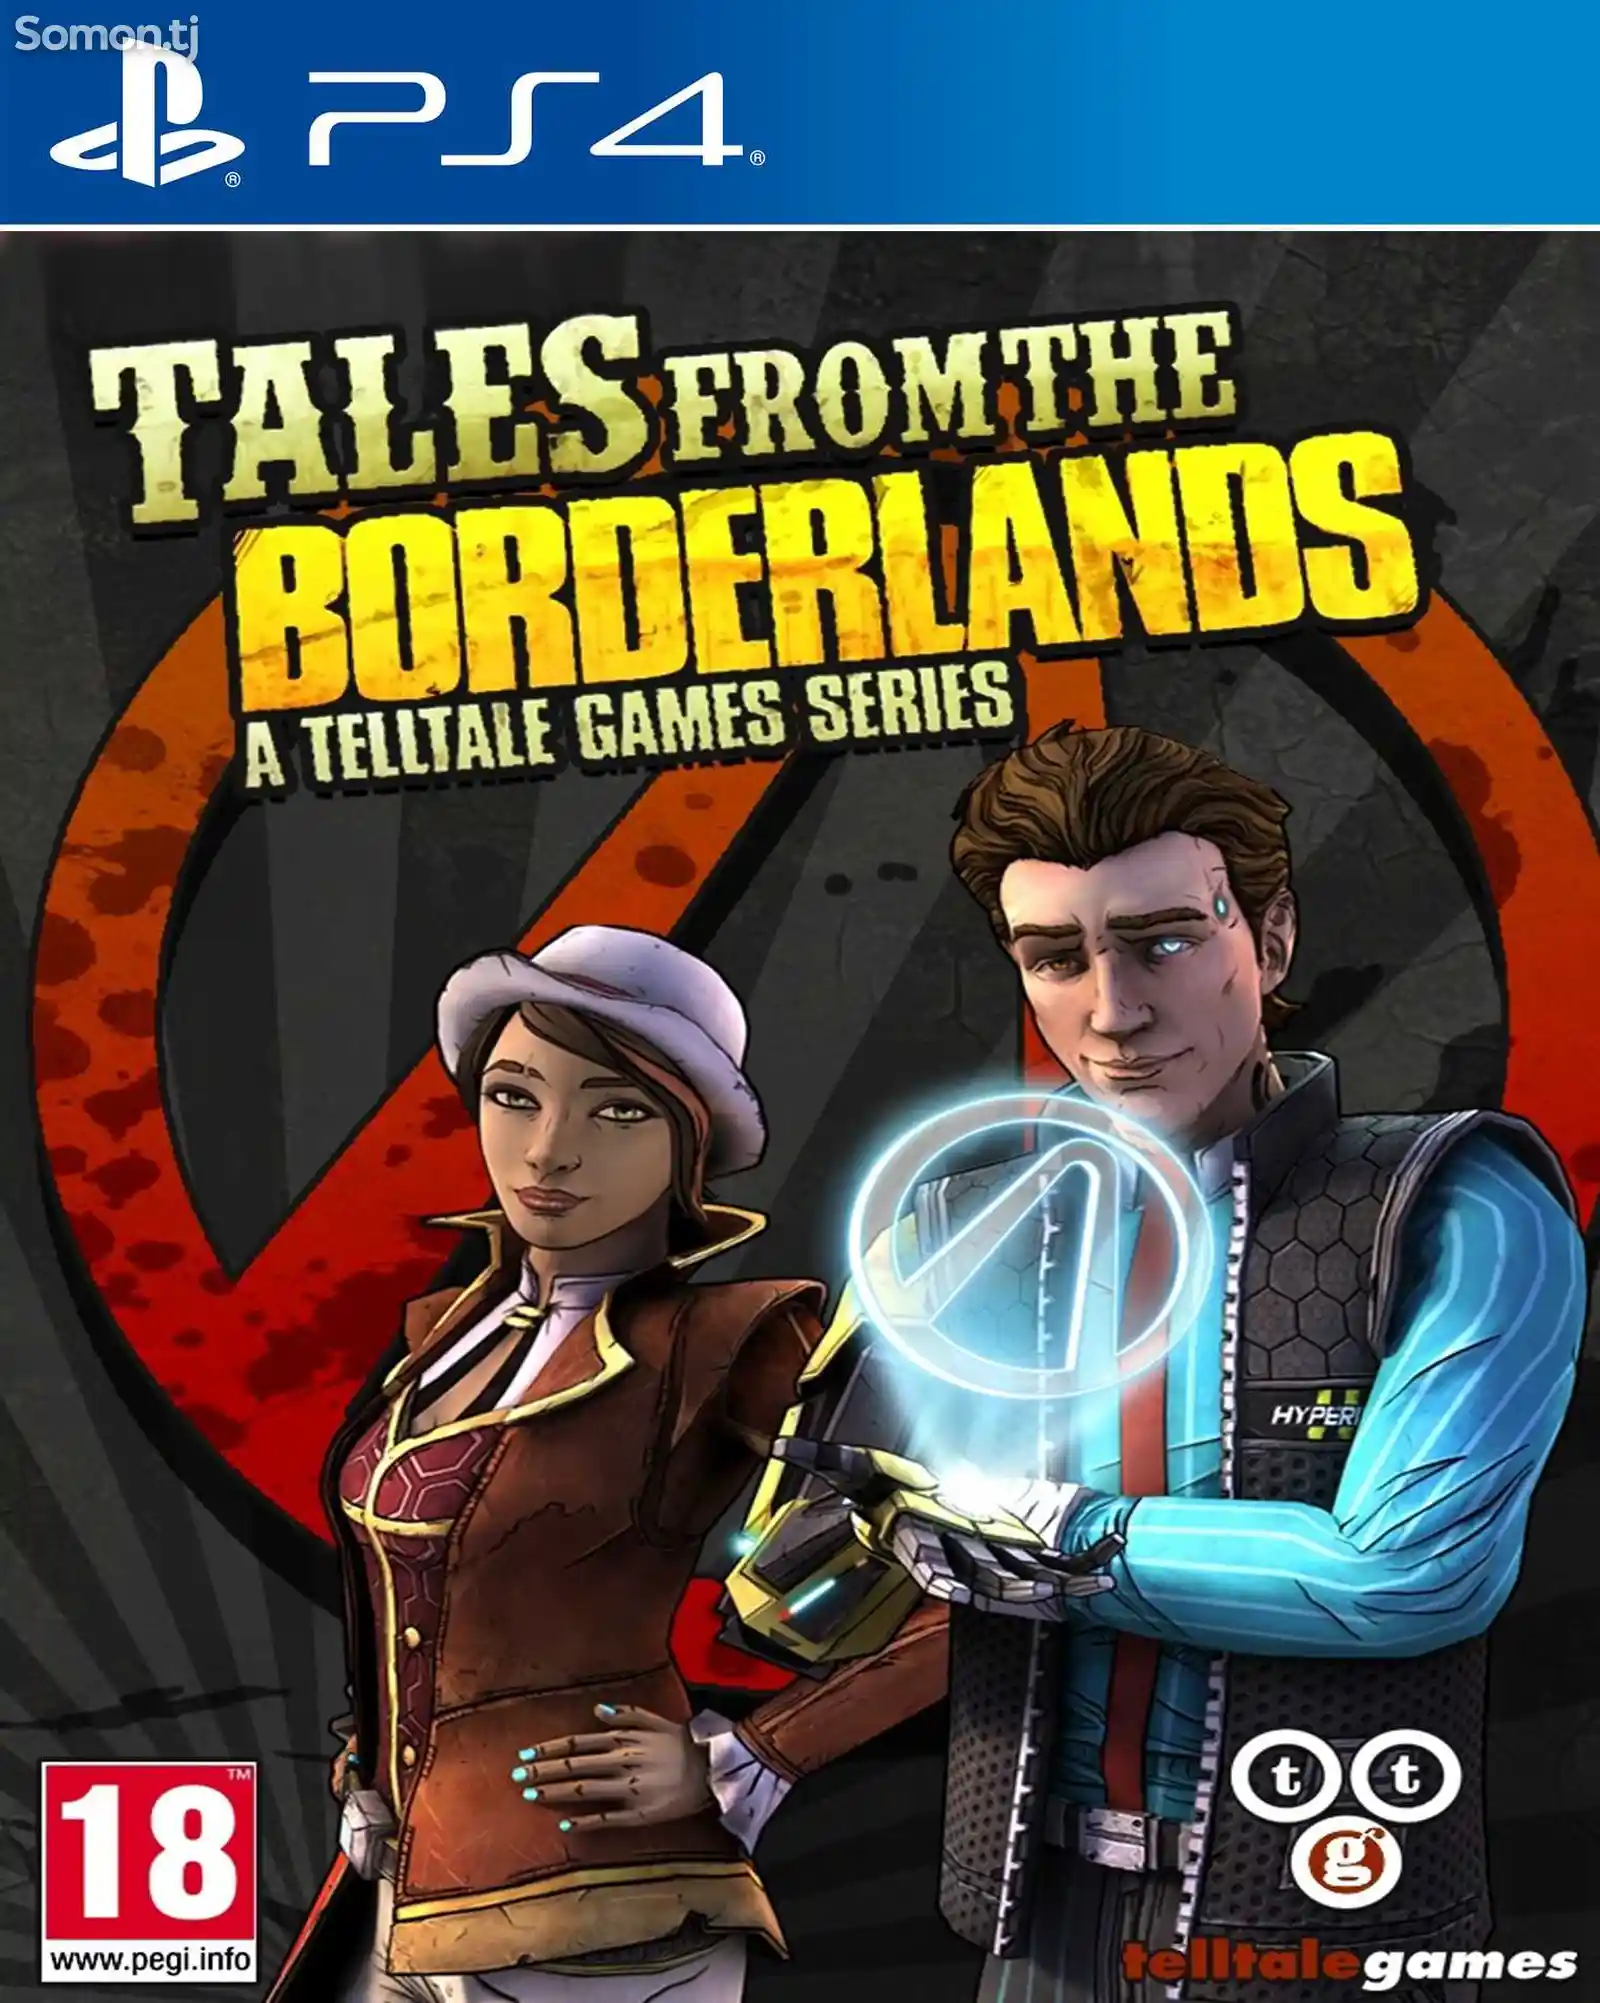 Игра New tales from the borderlands для PS-4 / 5.05 / 6.72 / 7.02 / 9.00 /-1